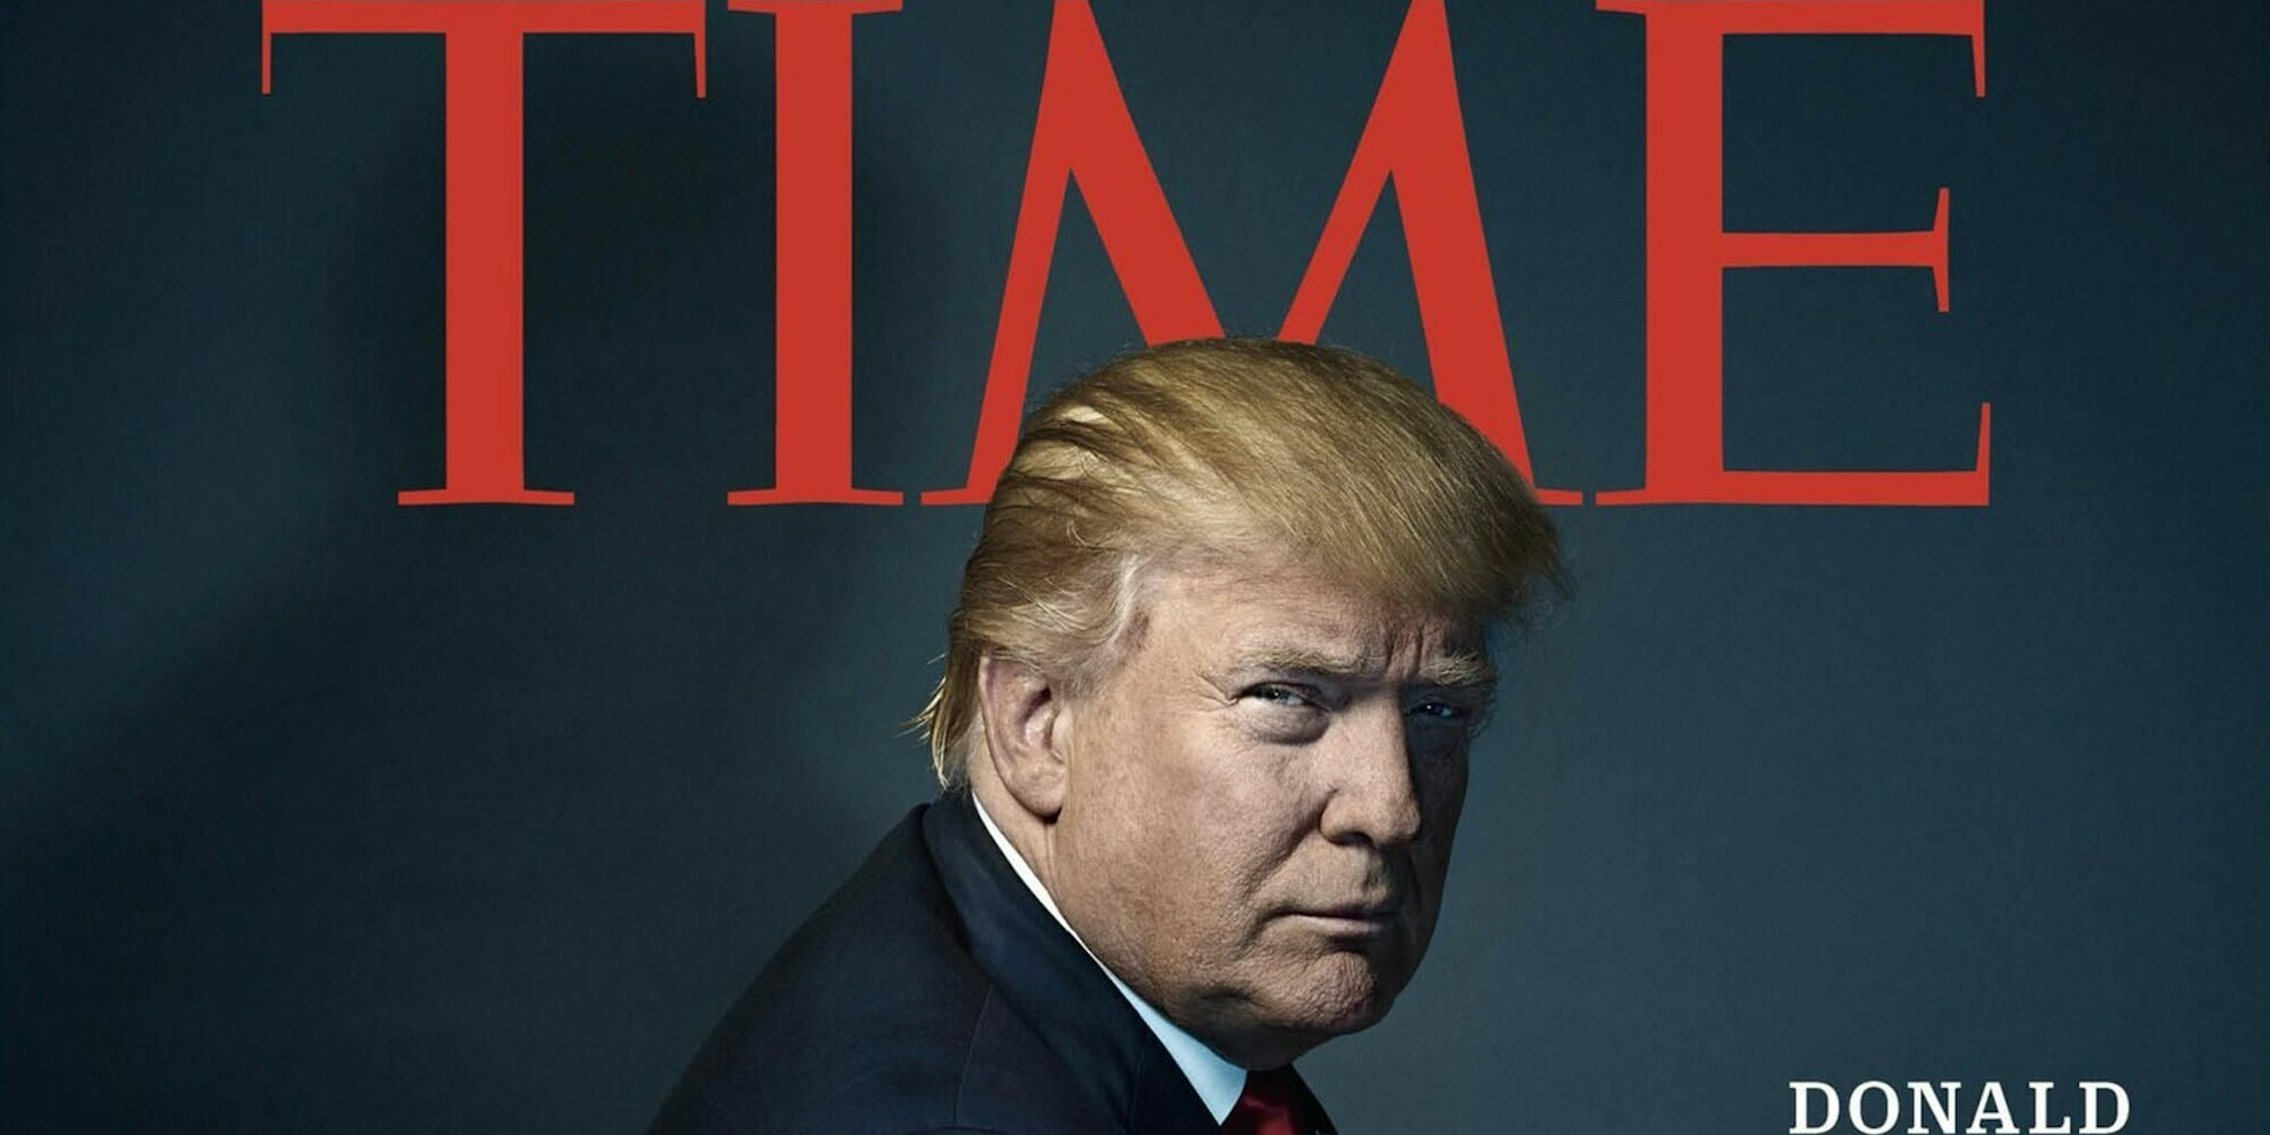 Trump Time Magazine Person of the Year Cover